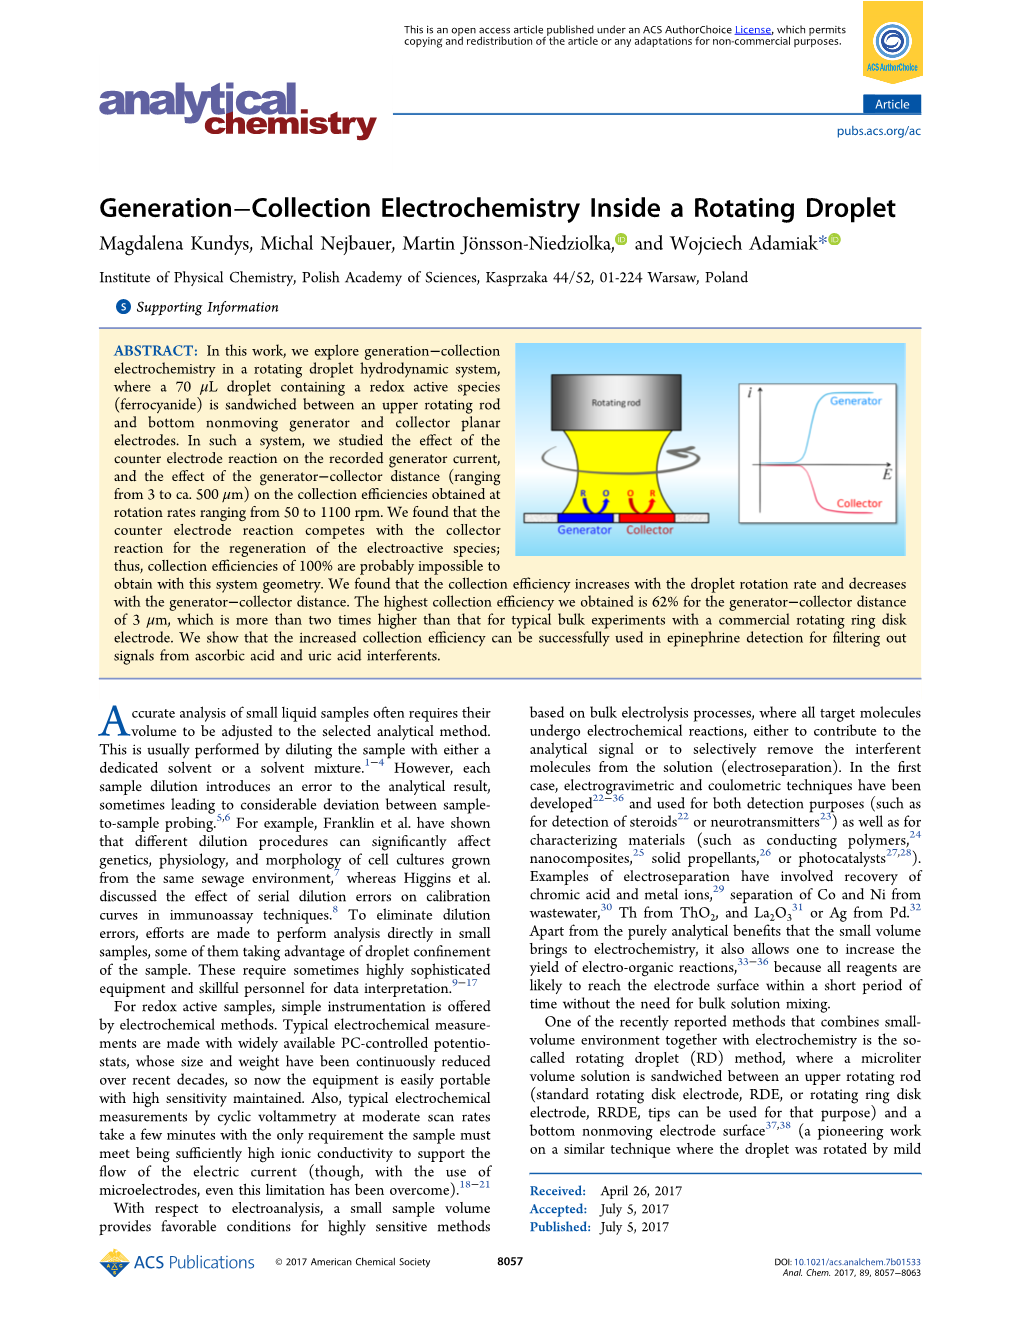 Generation−Collection Electrochemistry Inside a Rotating